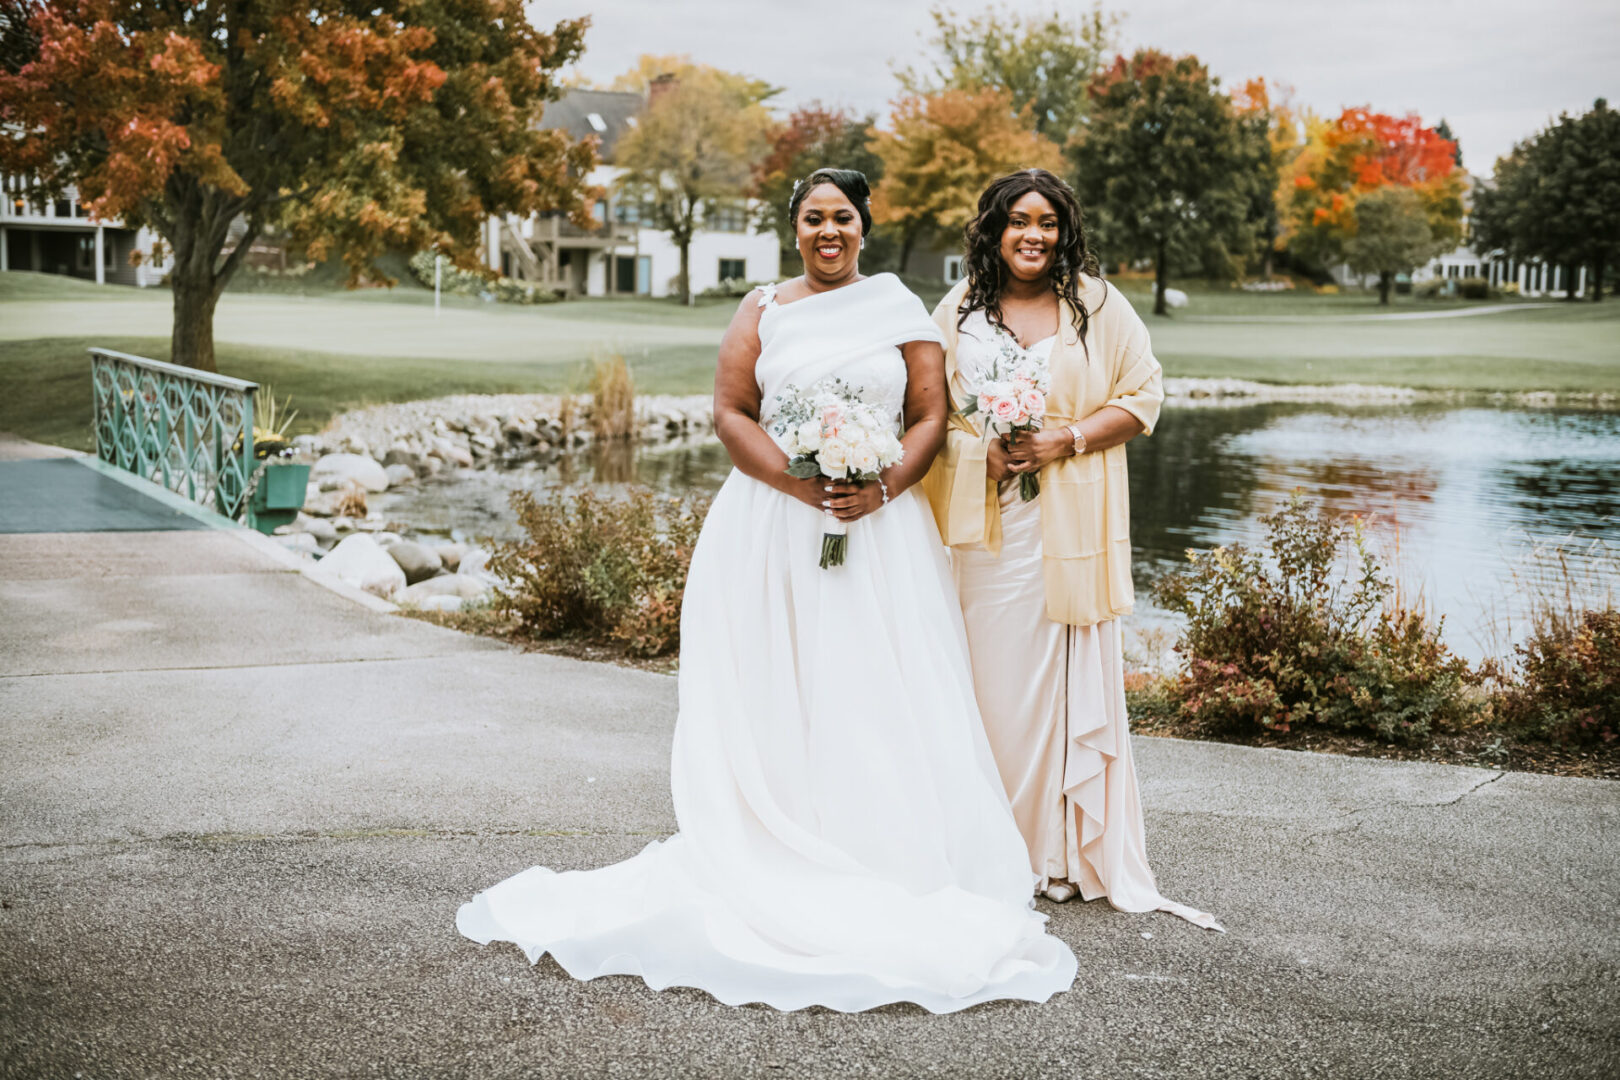 Bride with matron of honor